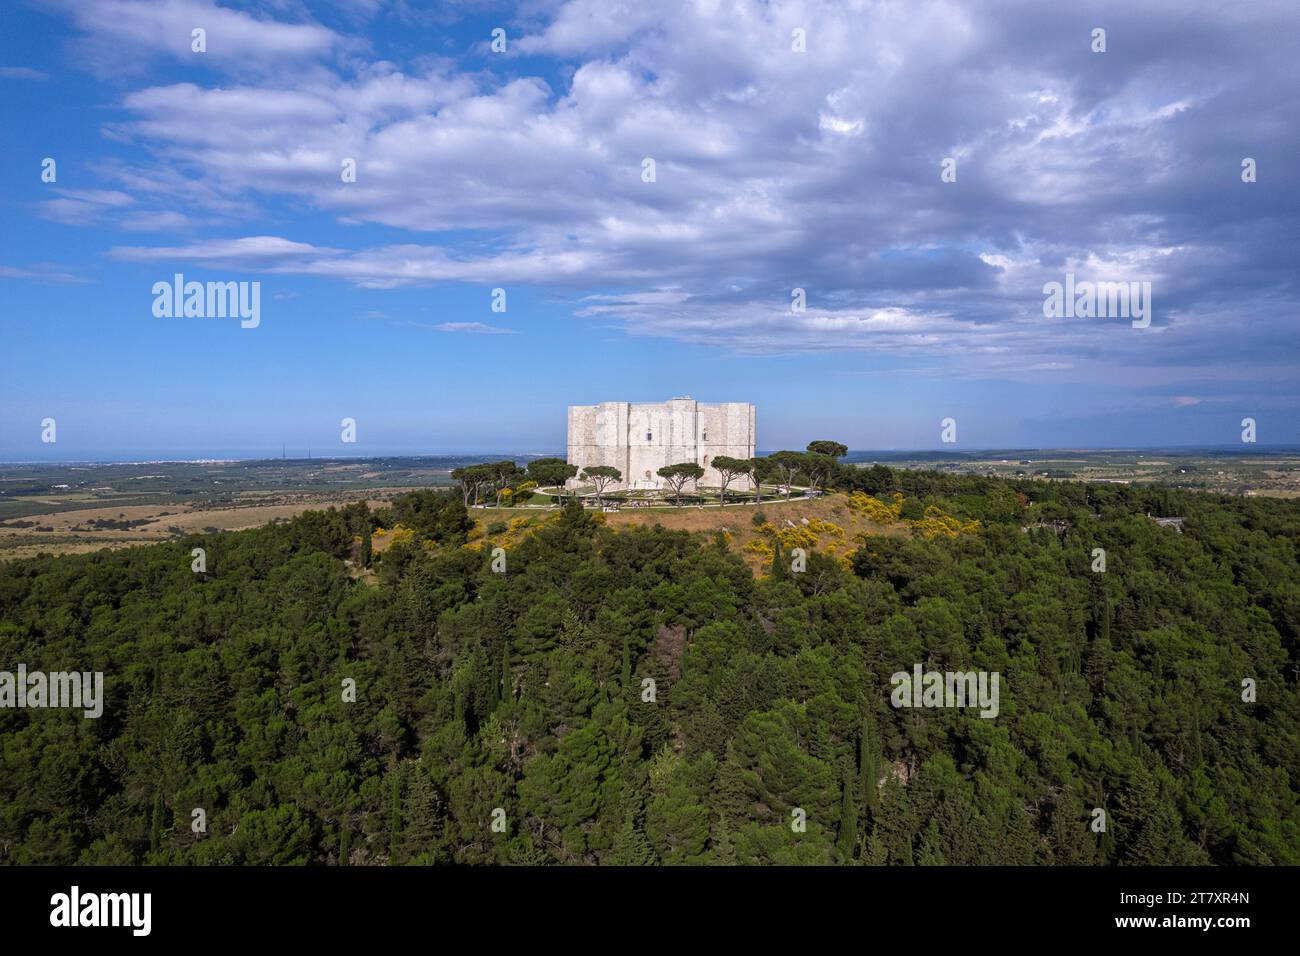 Castel del Monte on top of a hill surrounded by trees, aerial view, UNESCO World Heritage Site, Apulia, South of Italy, Italy, Europe Stock Photo